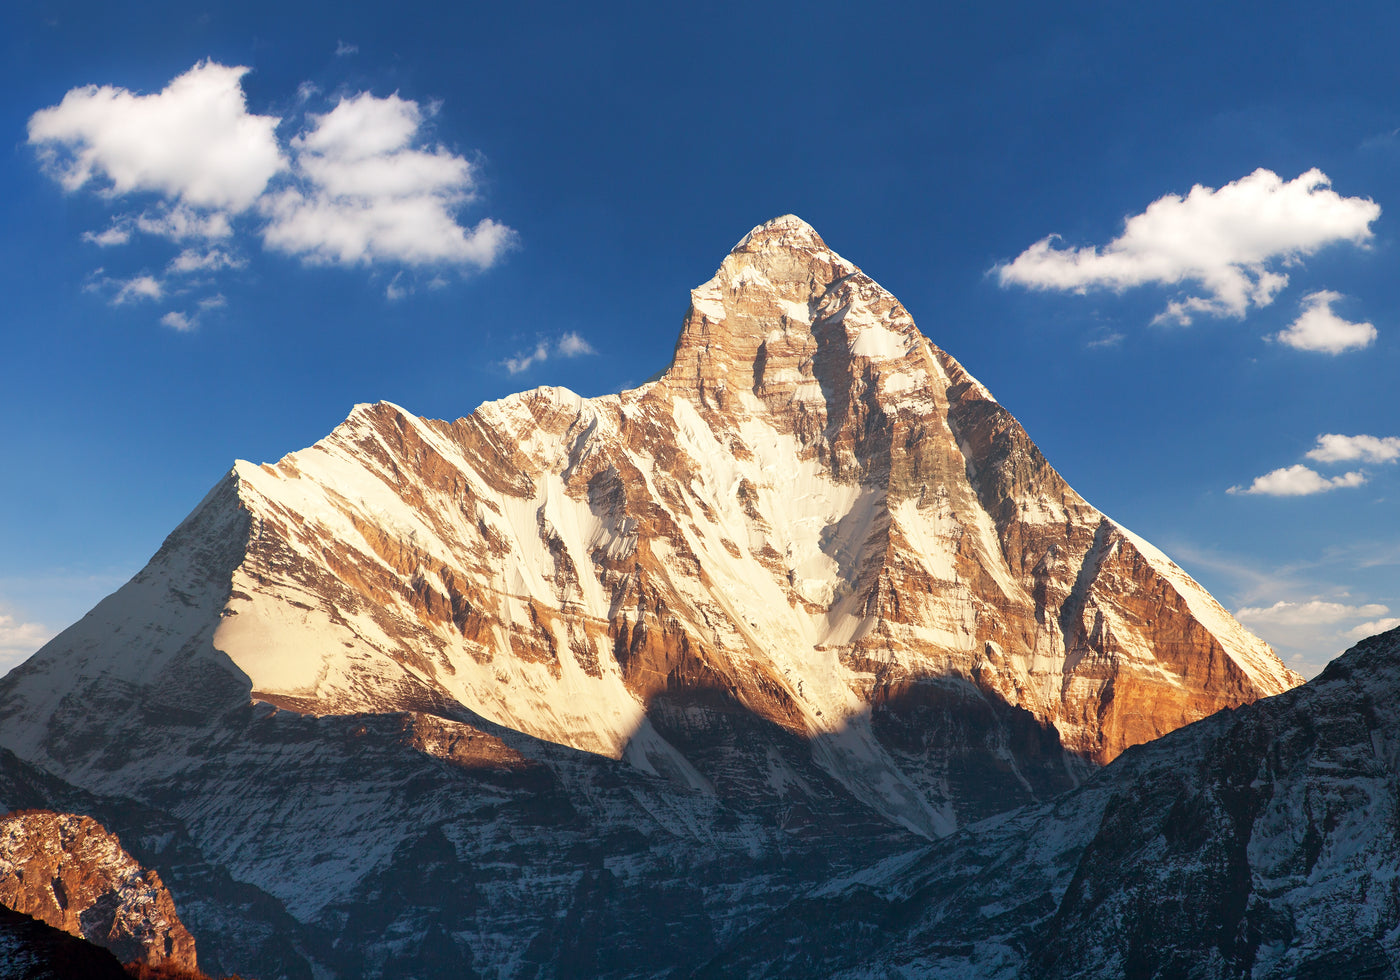 Snow Capped Mountains that Breathe Life: A Take on Himalayas on International Mountains Day